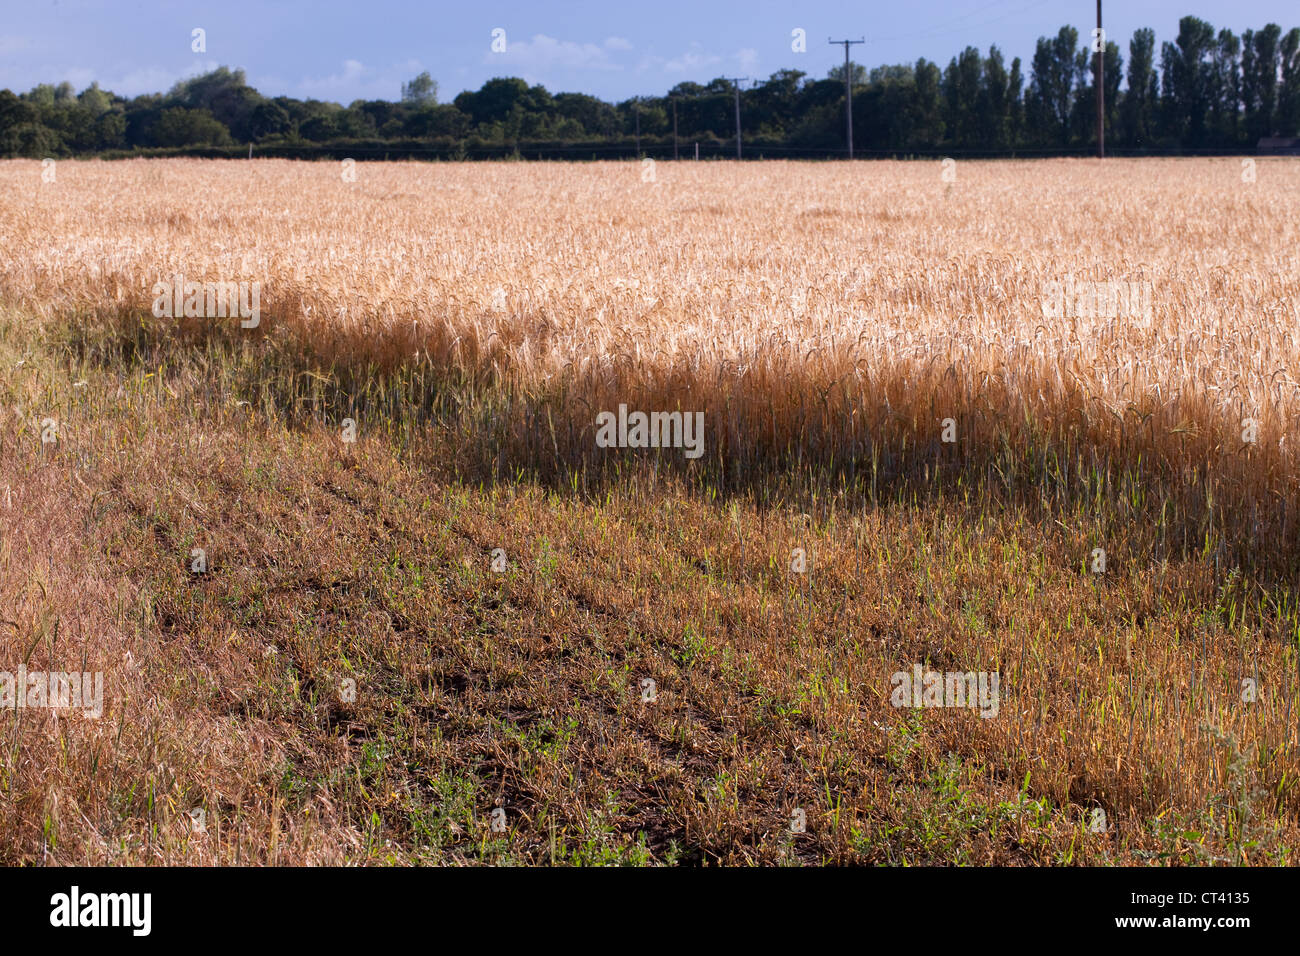 Barley (Hordeum vulgare). An area of crop along field edge previously grazed and degraded by Rabbits (Oryctolagus cuniculus). Stock Photo